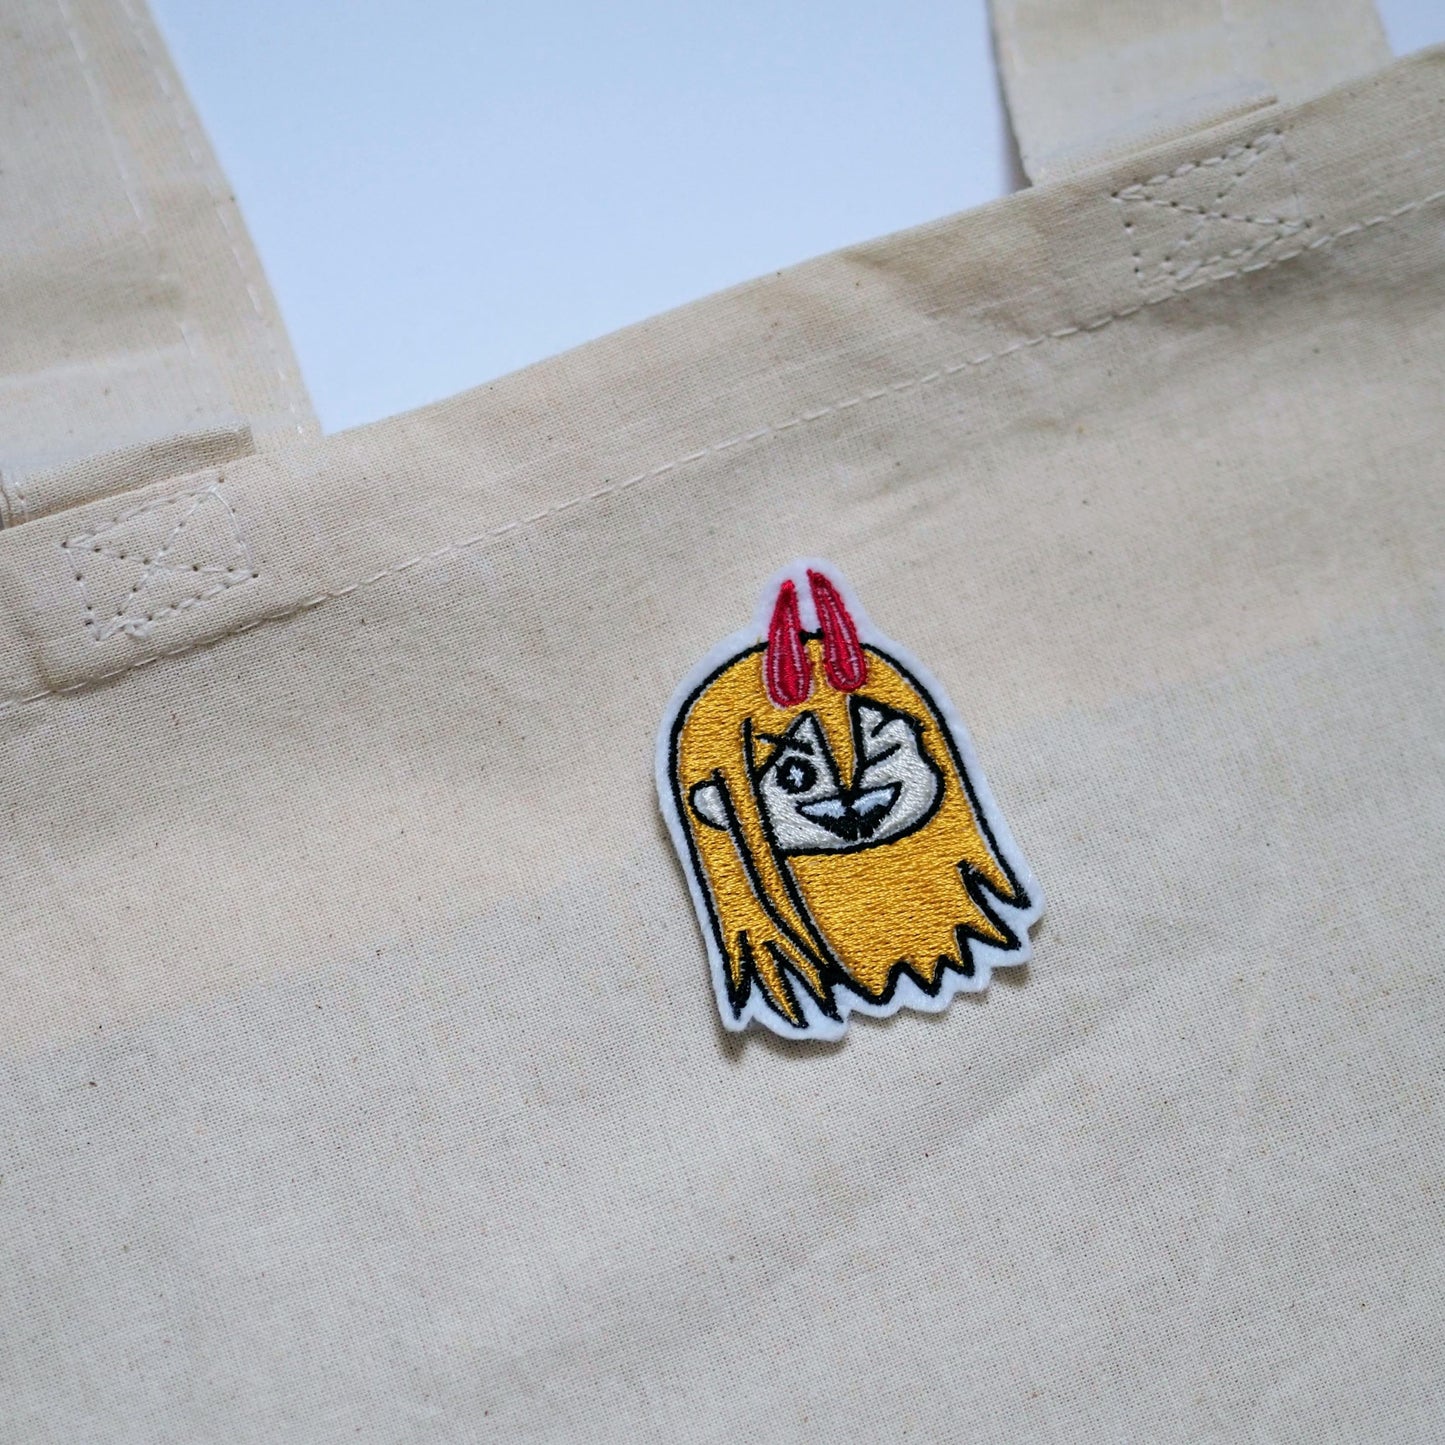 Chainsaw Man Embroidery Totes Bags and Iron on Patches - Moko's Boutique